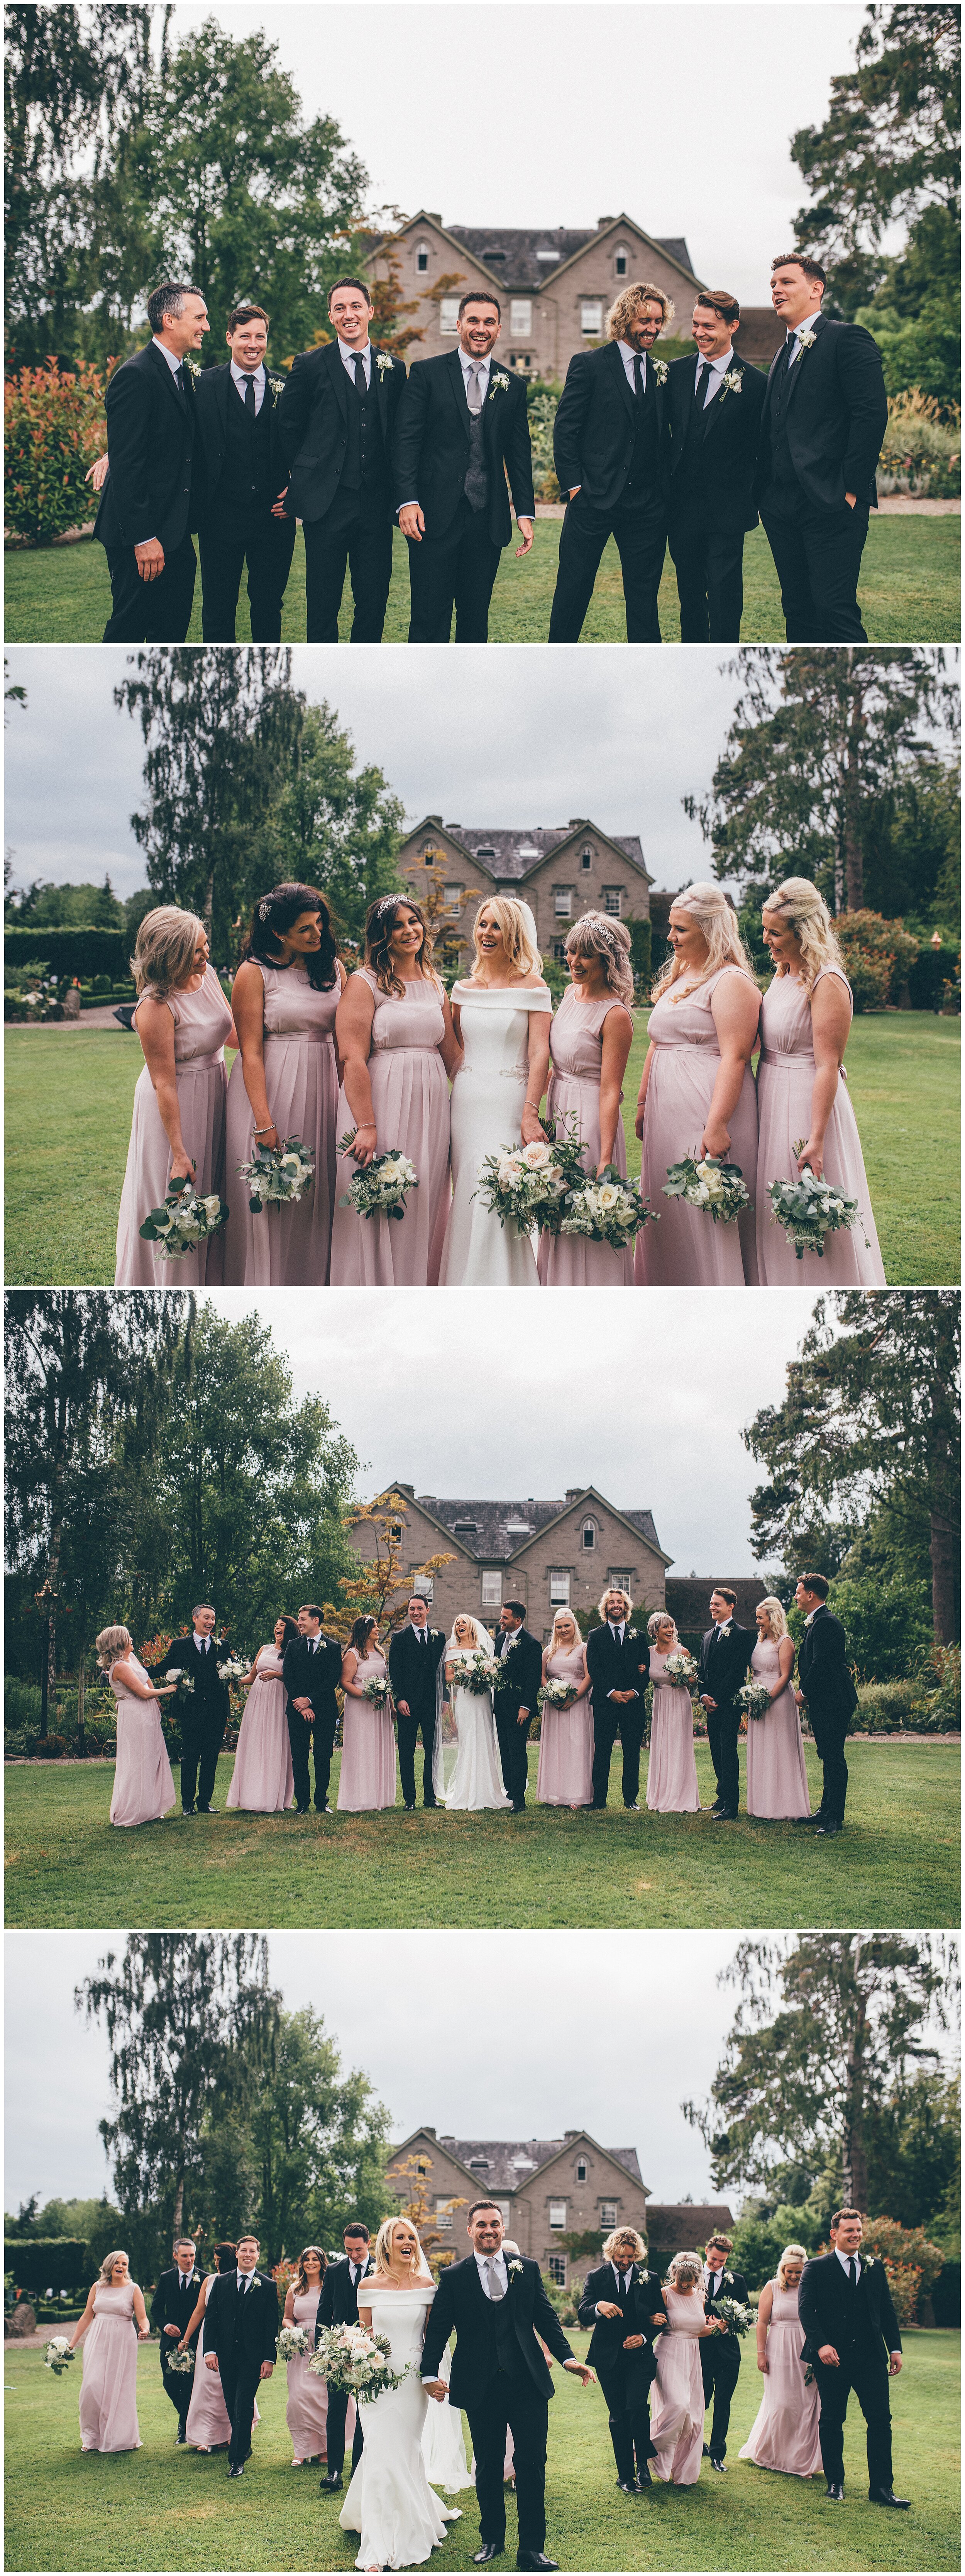 Beautiful bridesmaids and groomsman wedding photographs on the grounds at Lemore Manor in Hereford.